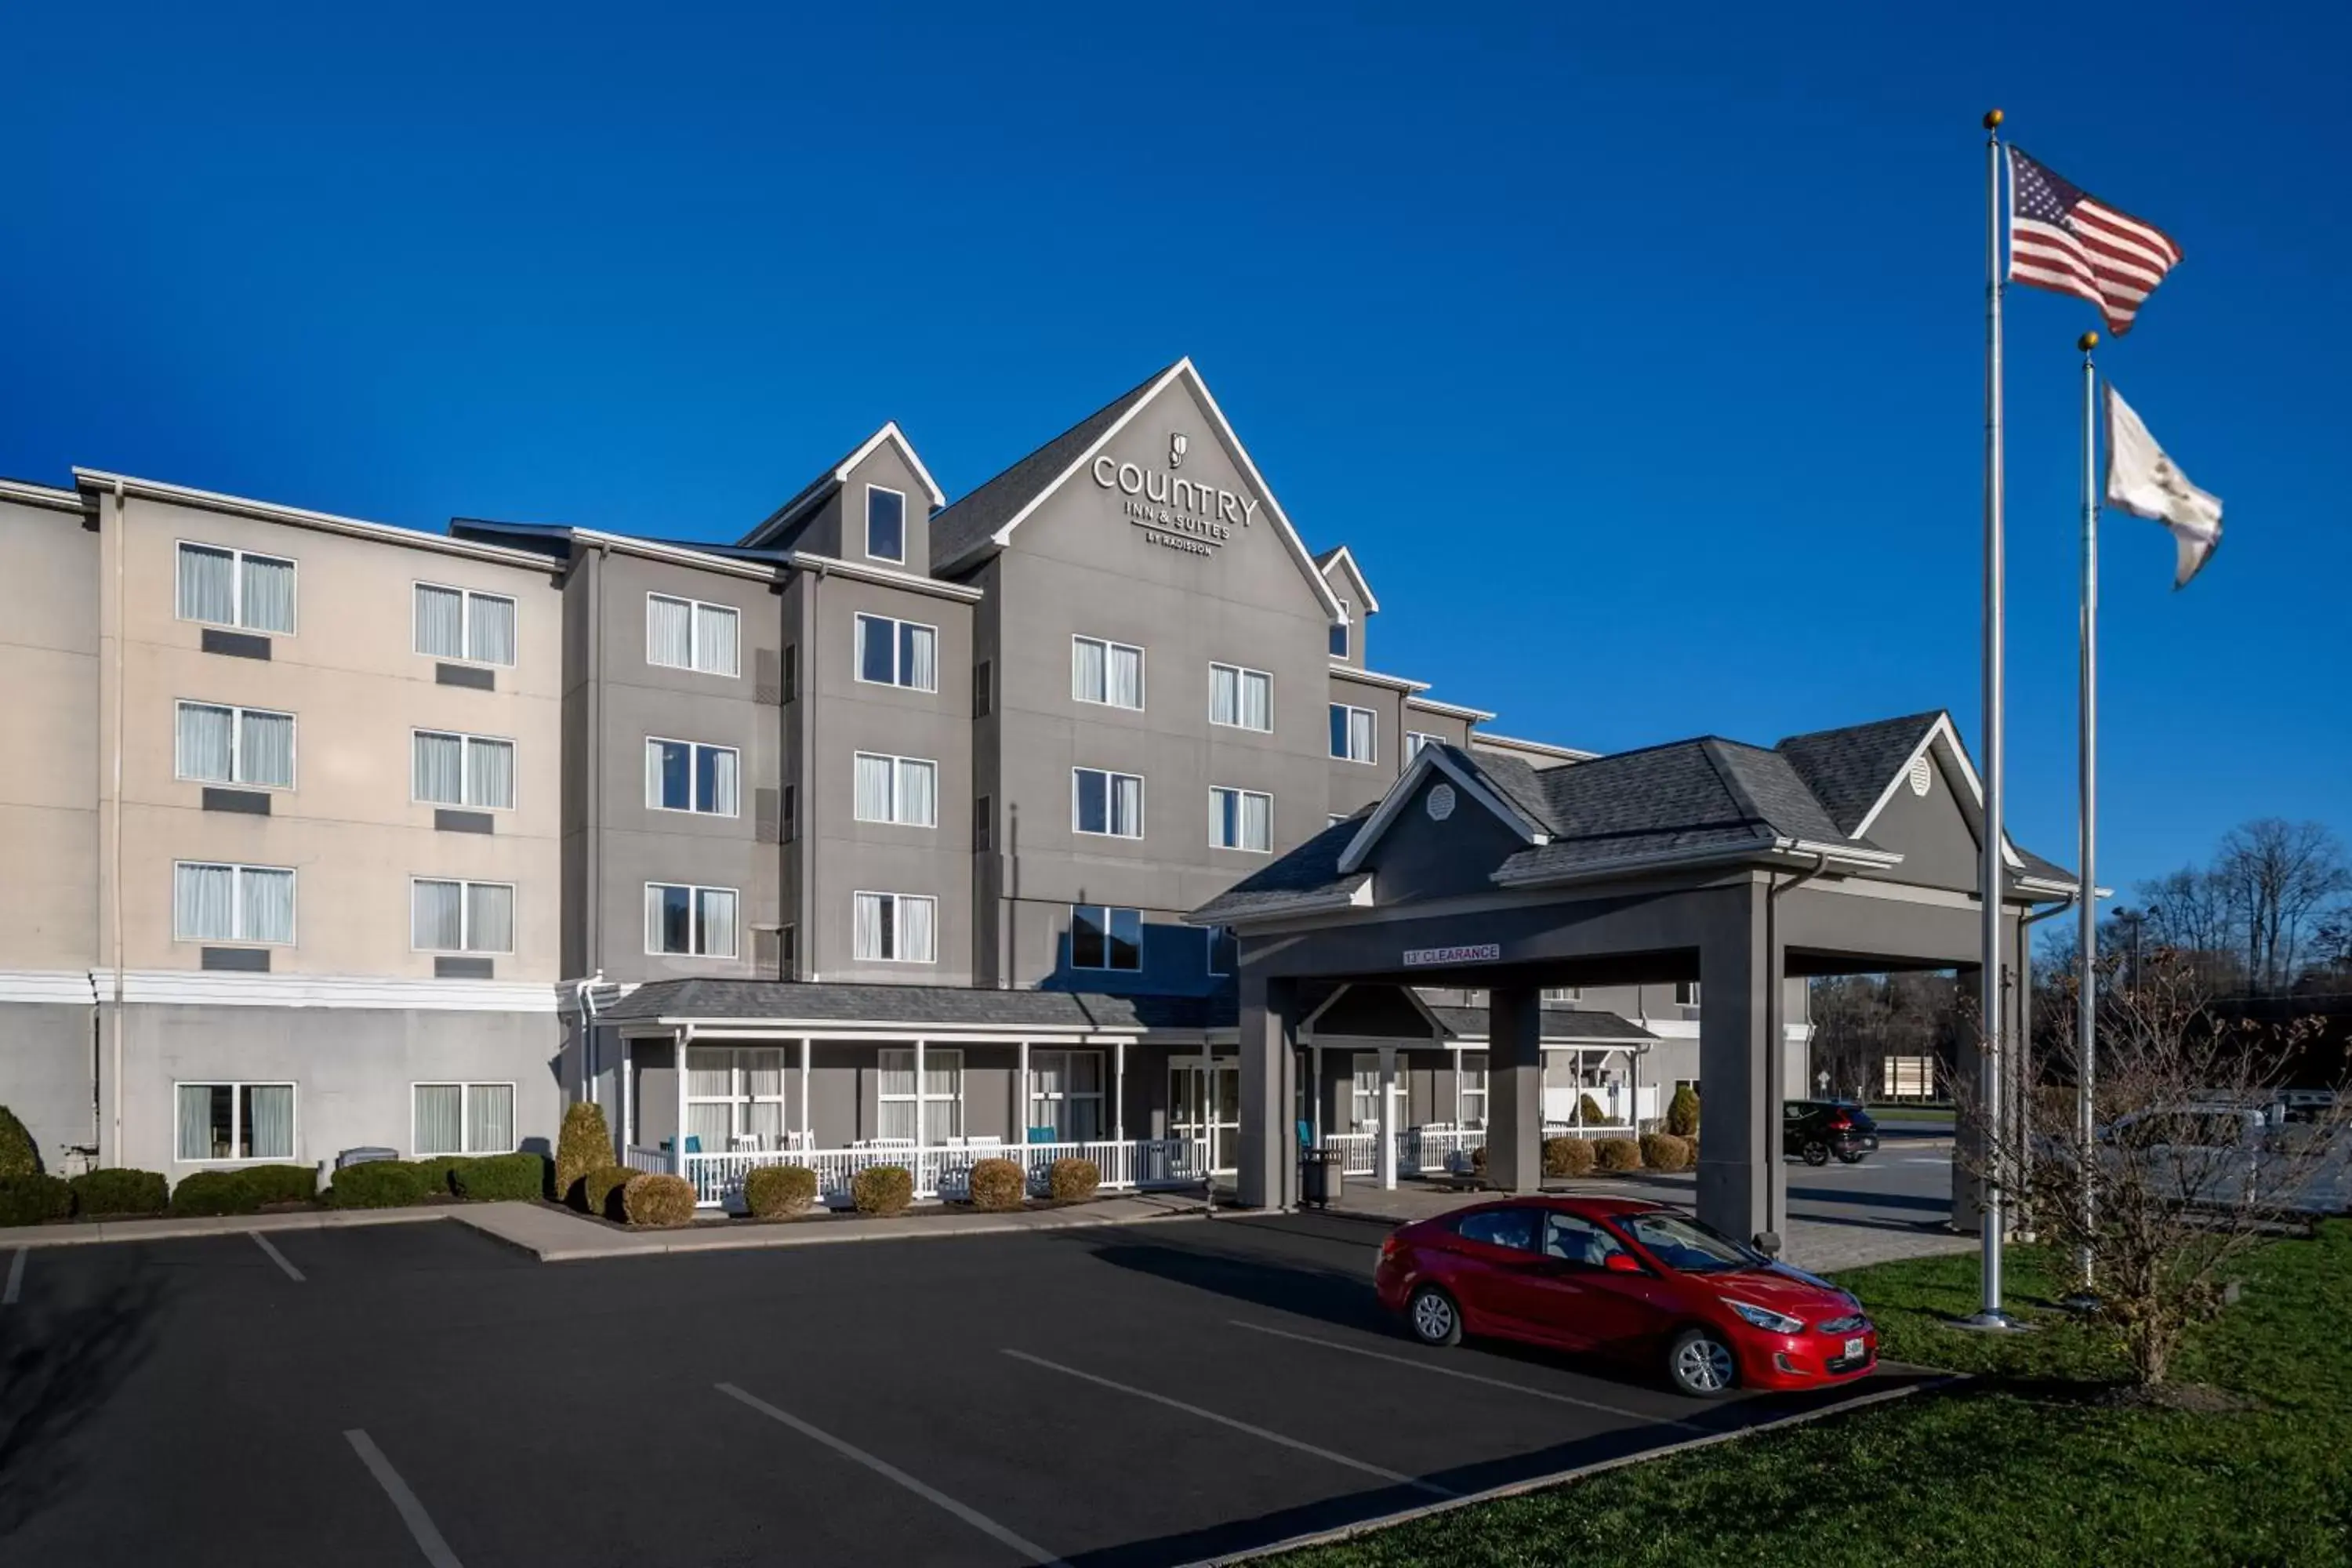 Property Building in Country Inn & Suites by Radisson, Princeton, WV